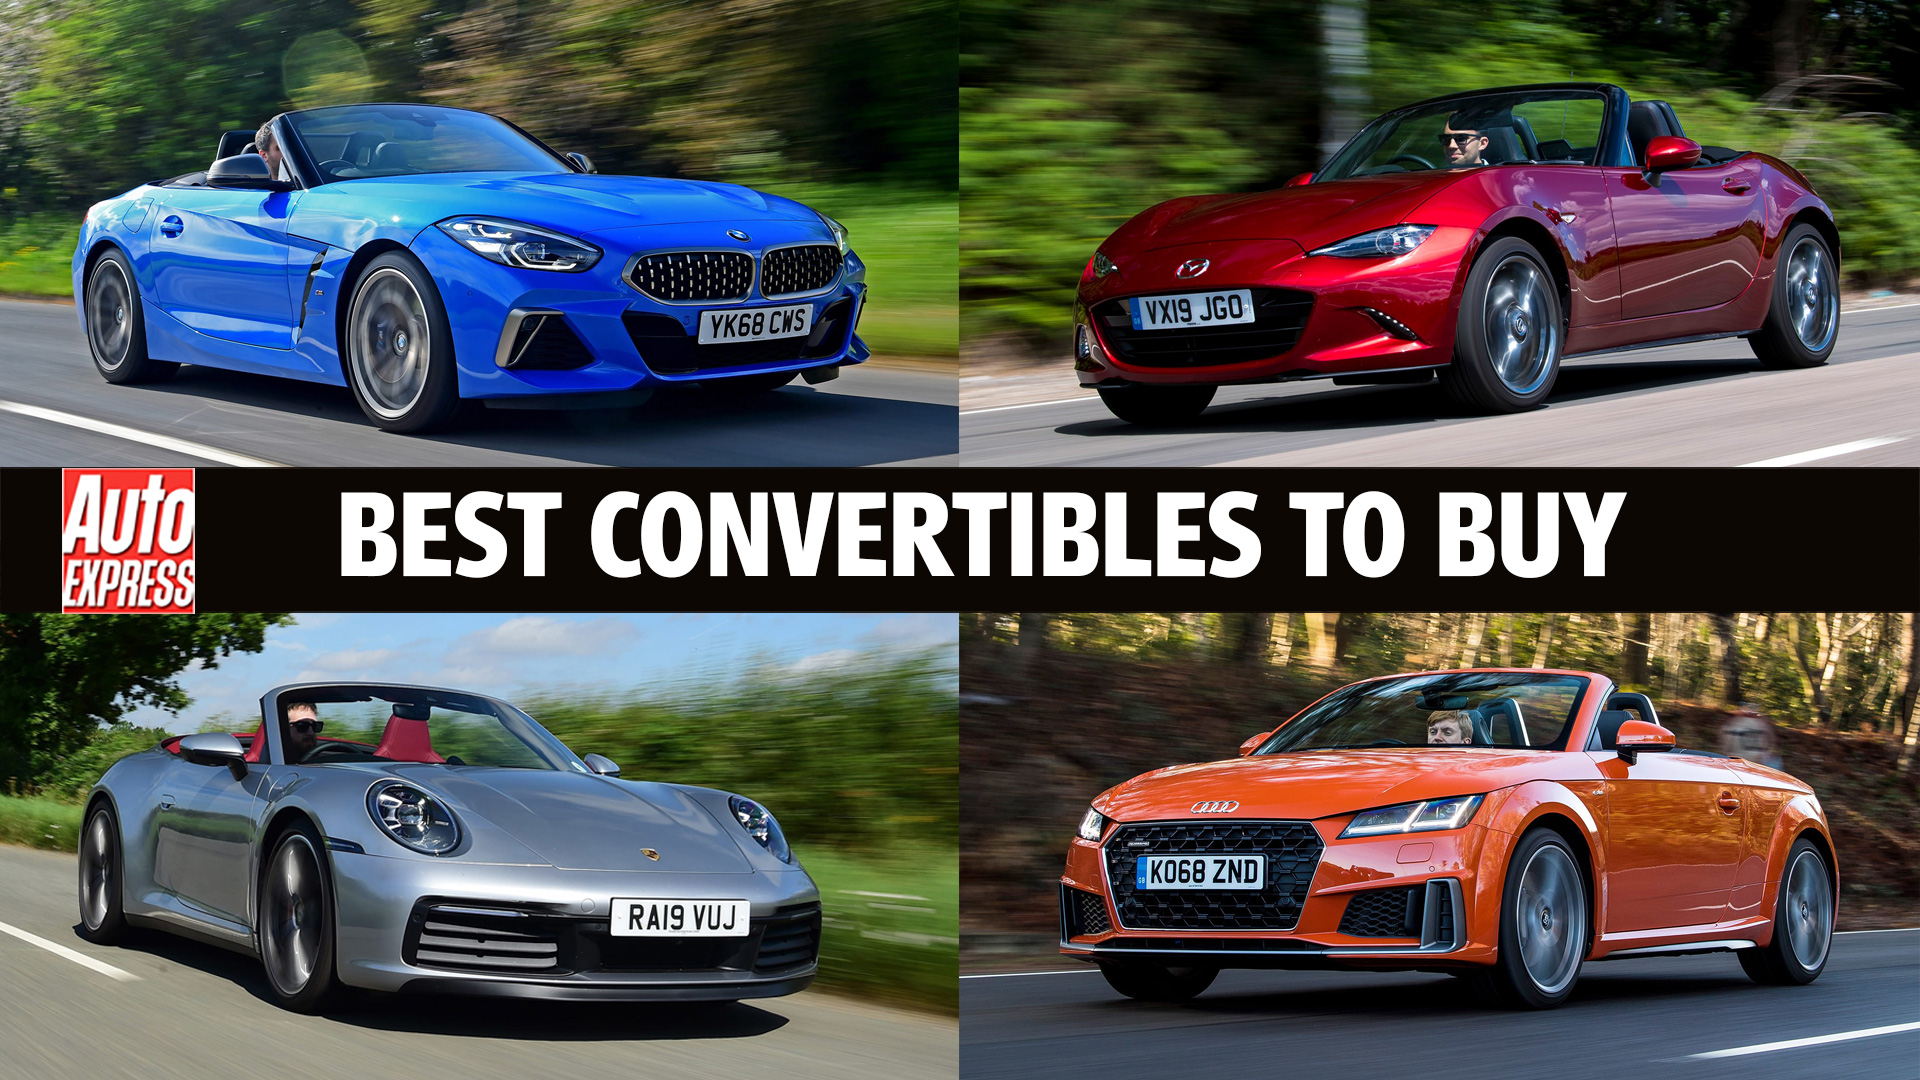 Best Convertible Cars & Cabriolets To Buy This Year